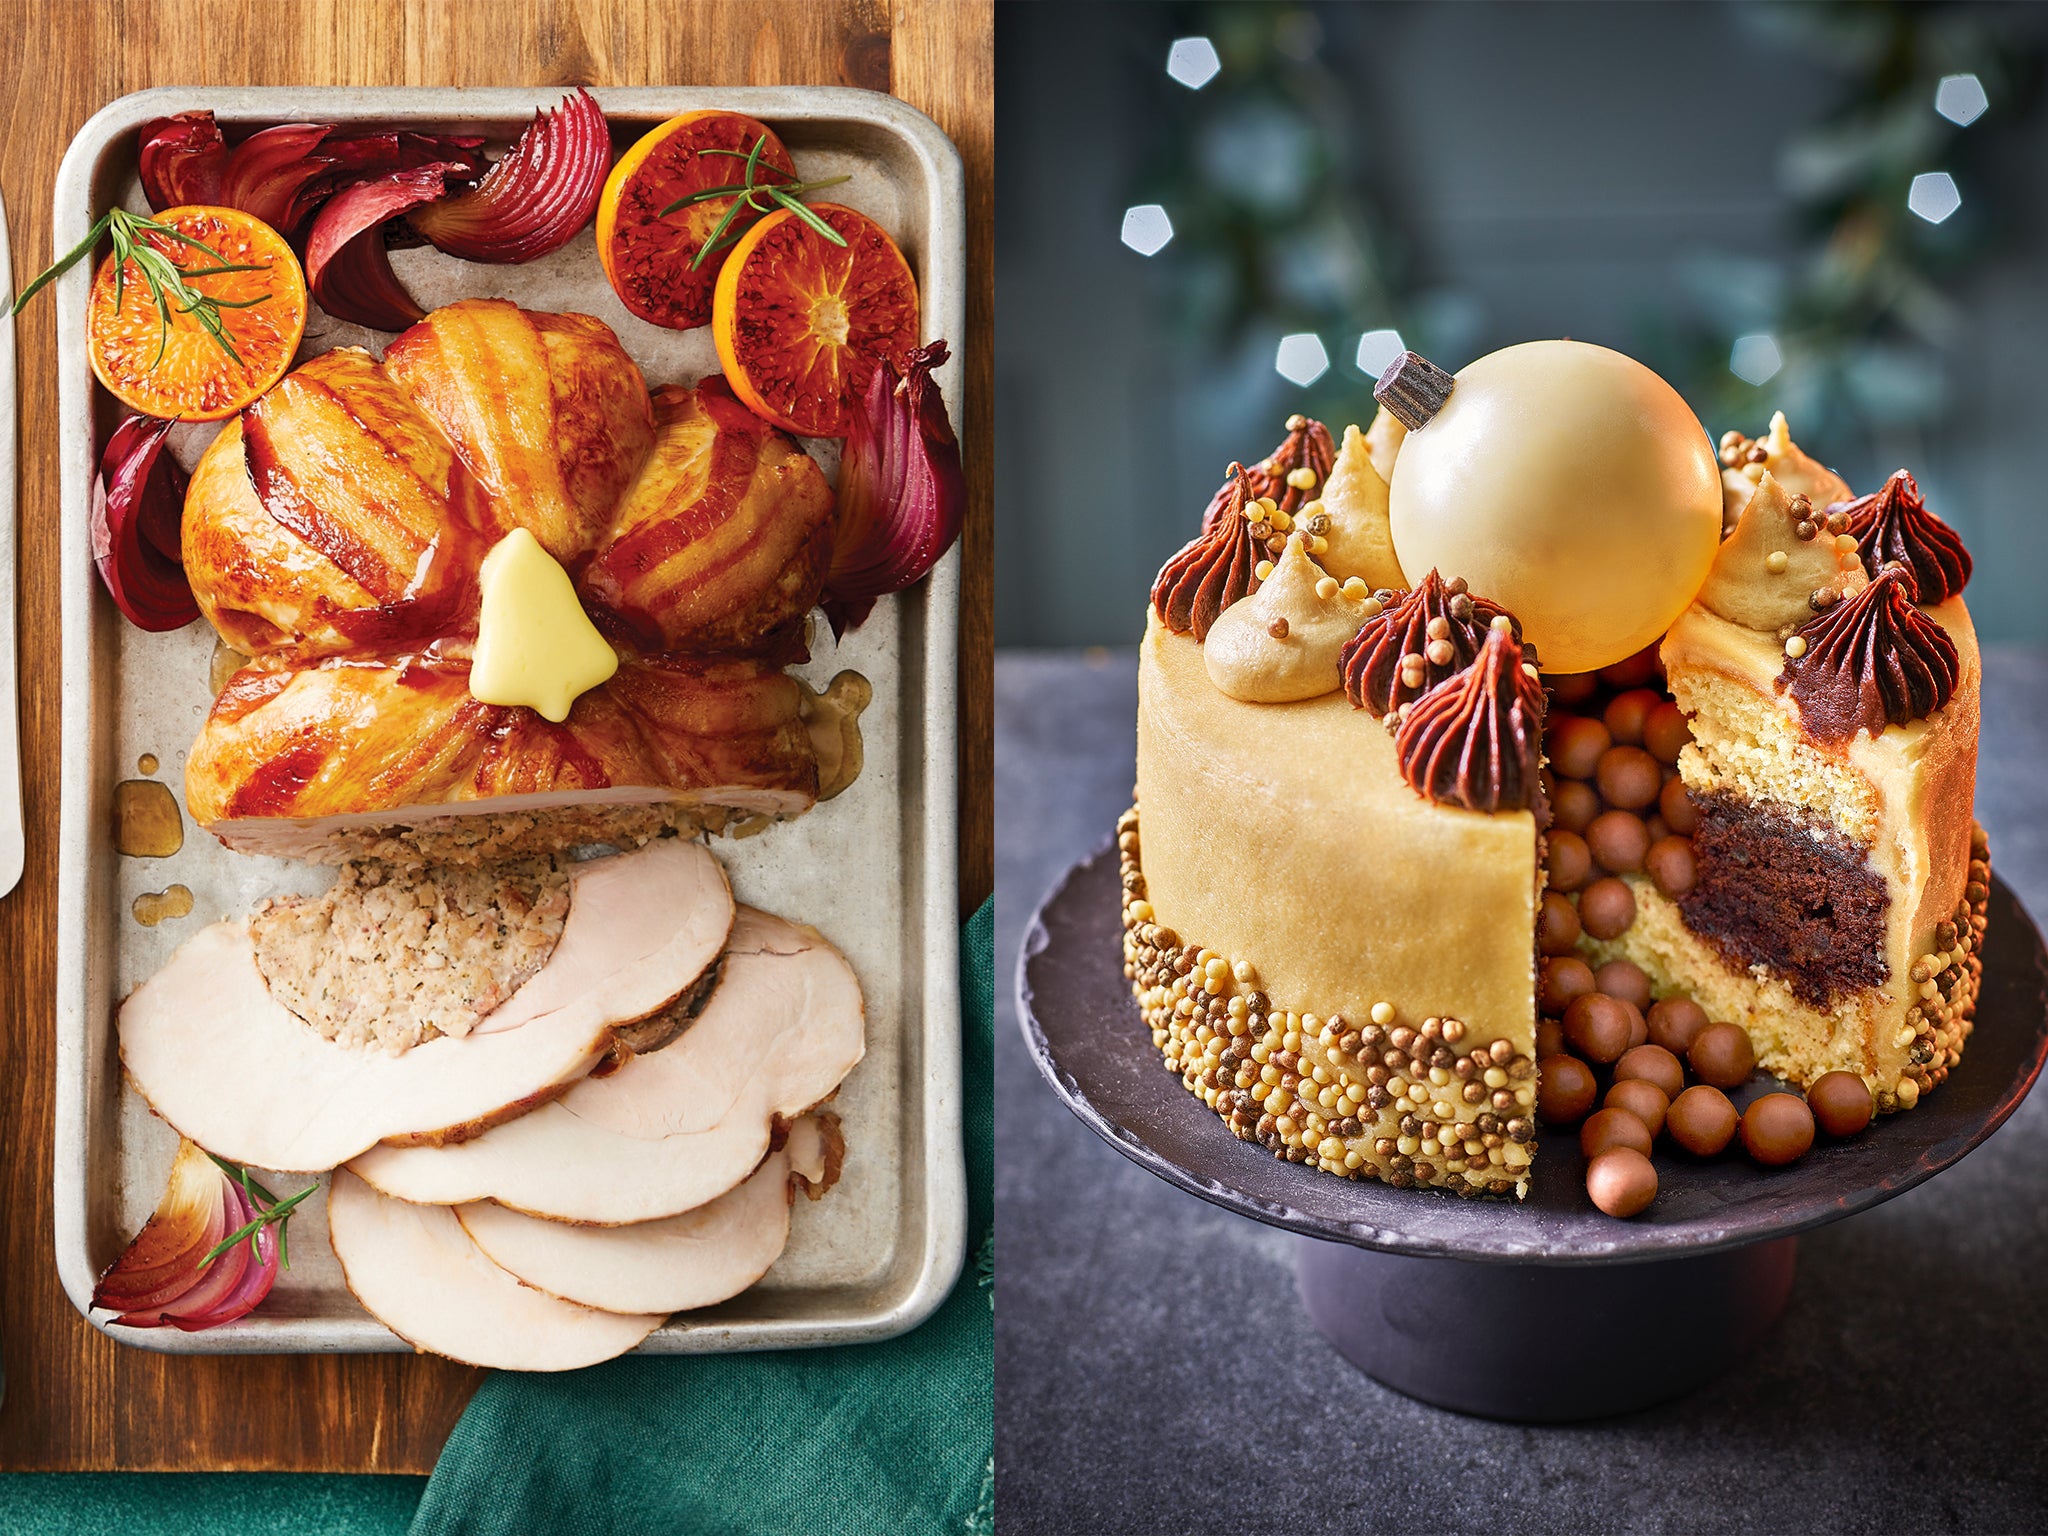 Best Christmas Food 2021: Tried And Tasted Christmas Award